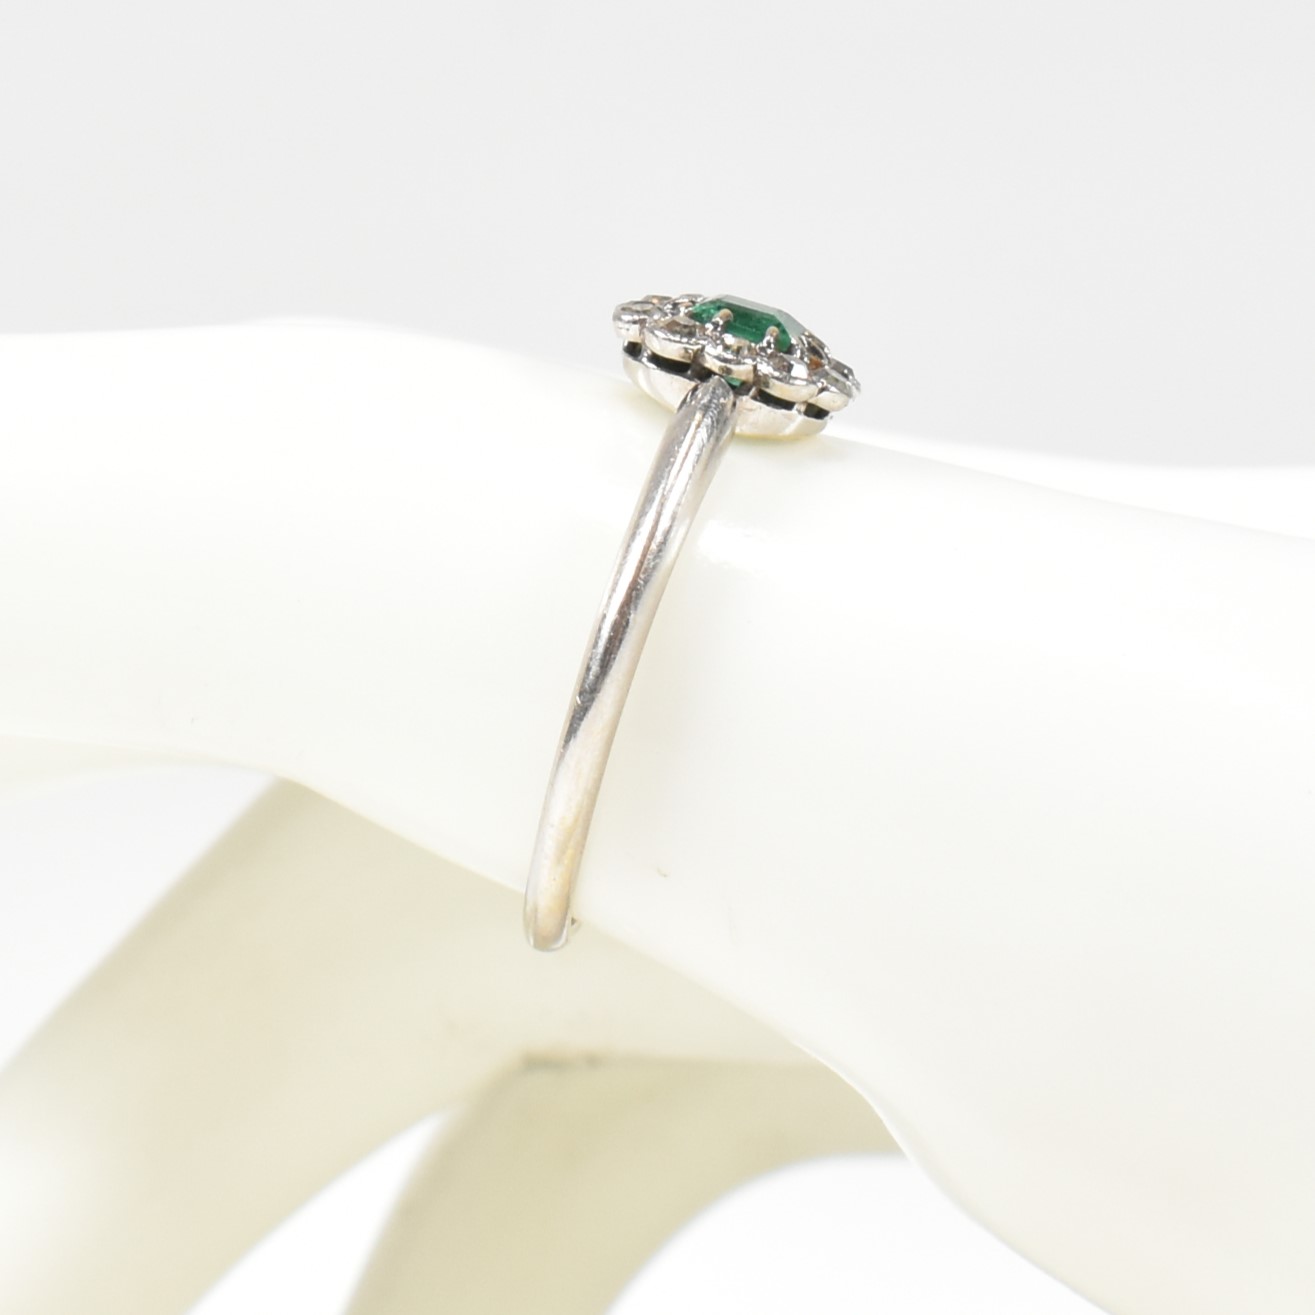 1920S 18CT WHITE GOLD EMERALD & DIAMOND CLUSTER RING - Image 8 of 9